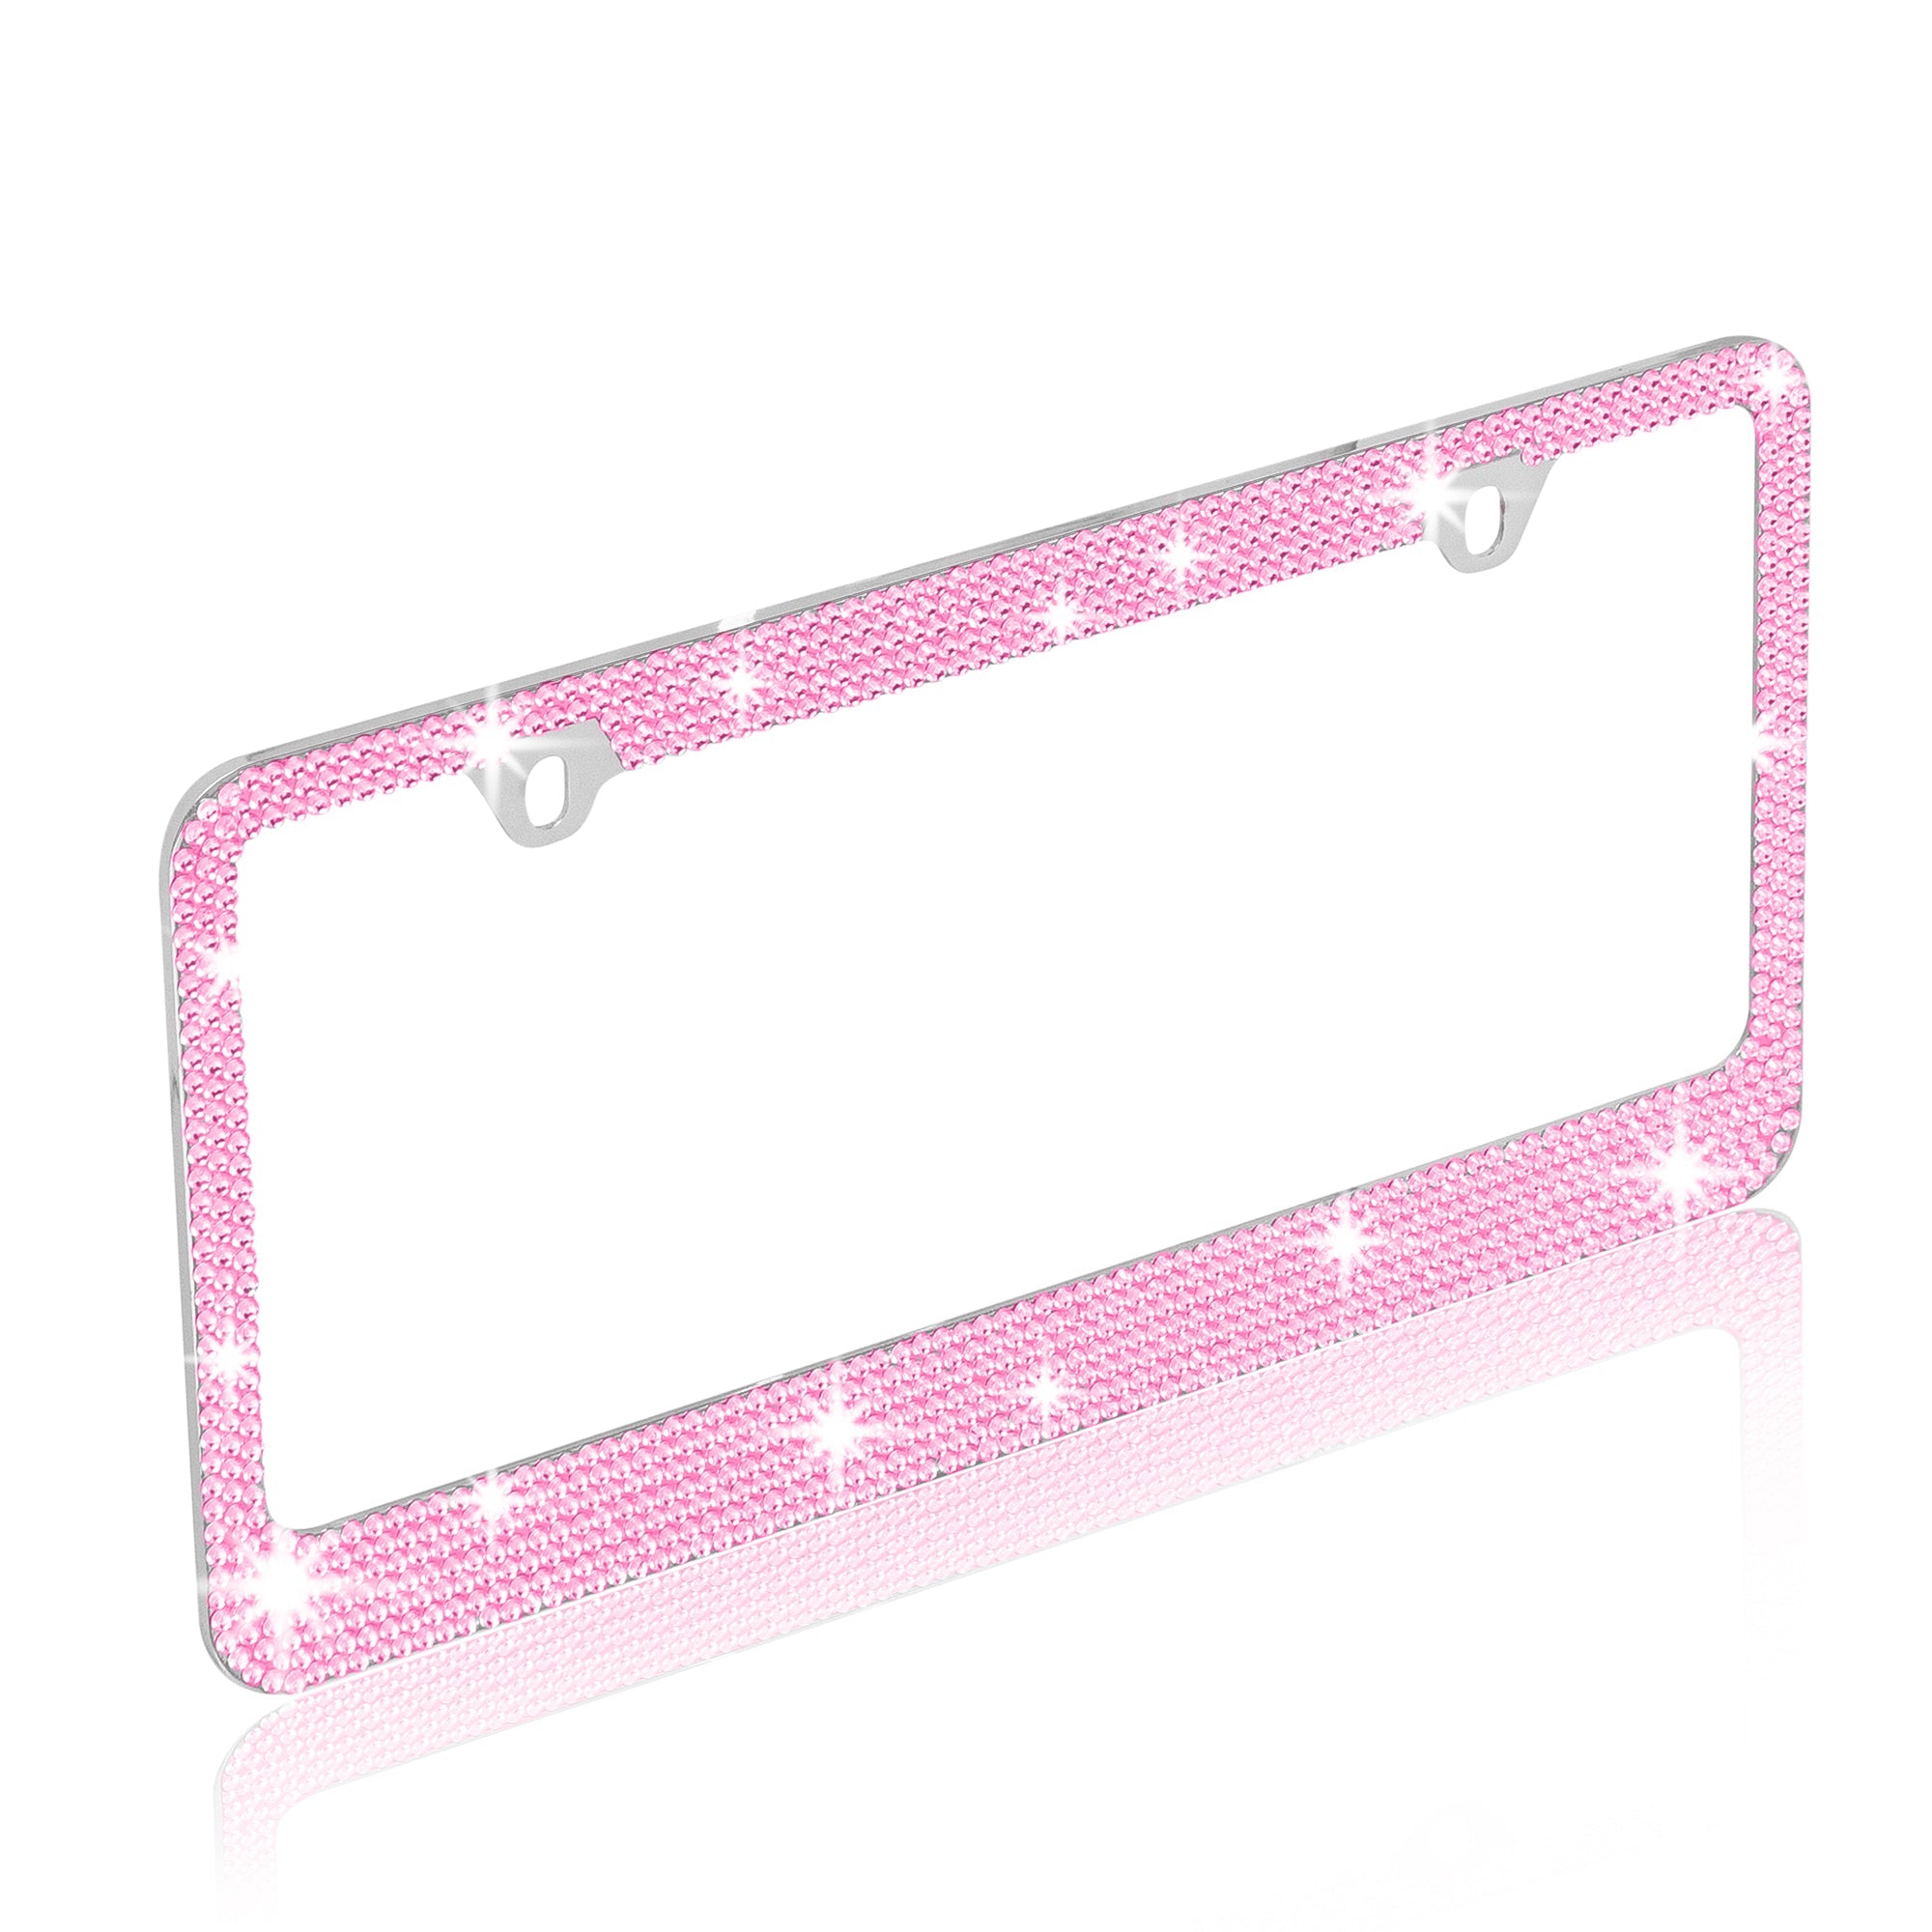 Stainless Steel Pink Sparkly Sparkling Diamond Crystal Bling Premium License Plate Frame Metal Silver Rhinestone for Women Universal Size for Car Truck SUV (Pack of 2) - 2-Pack